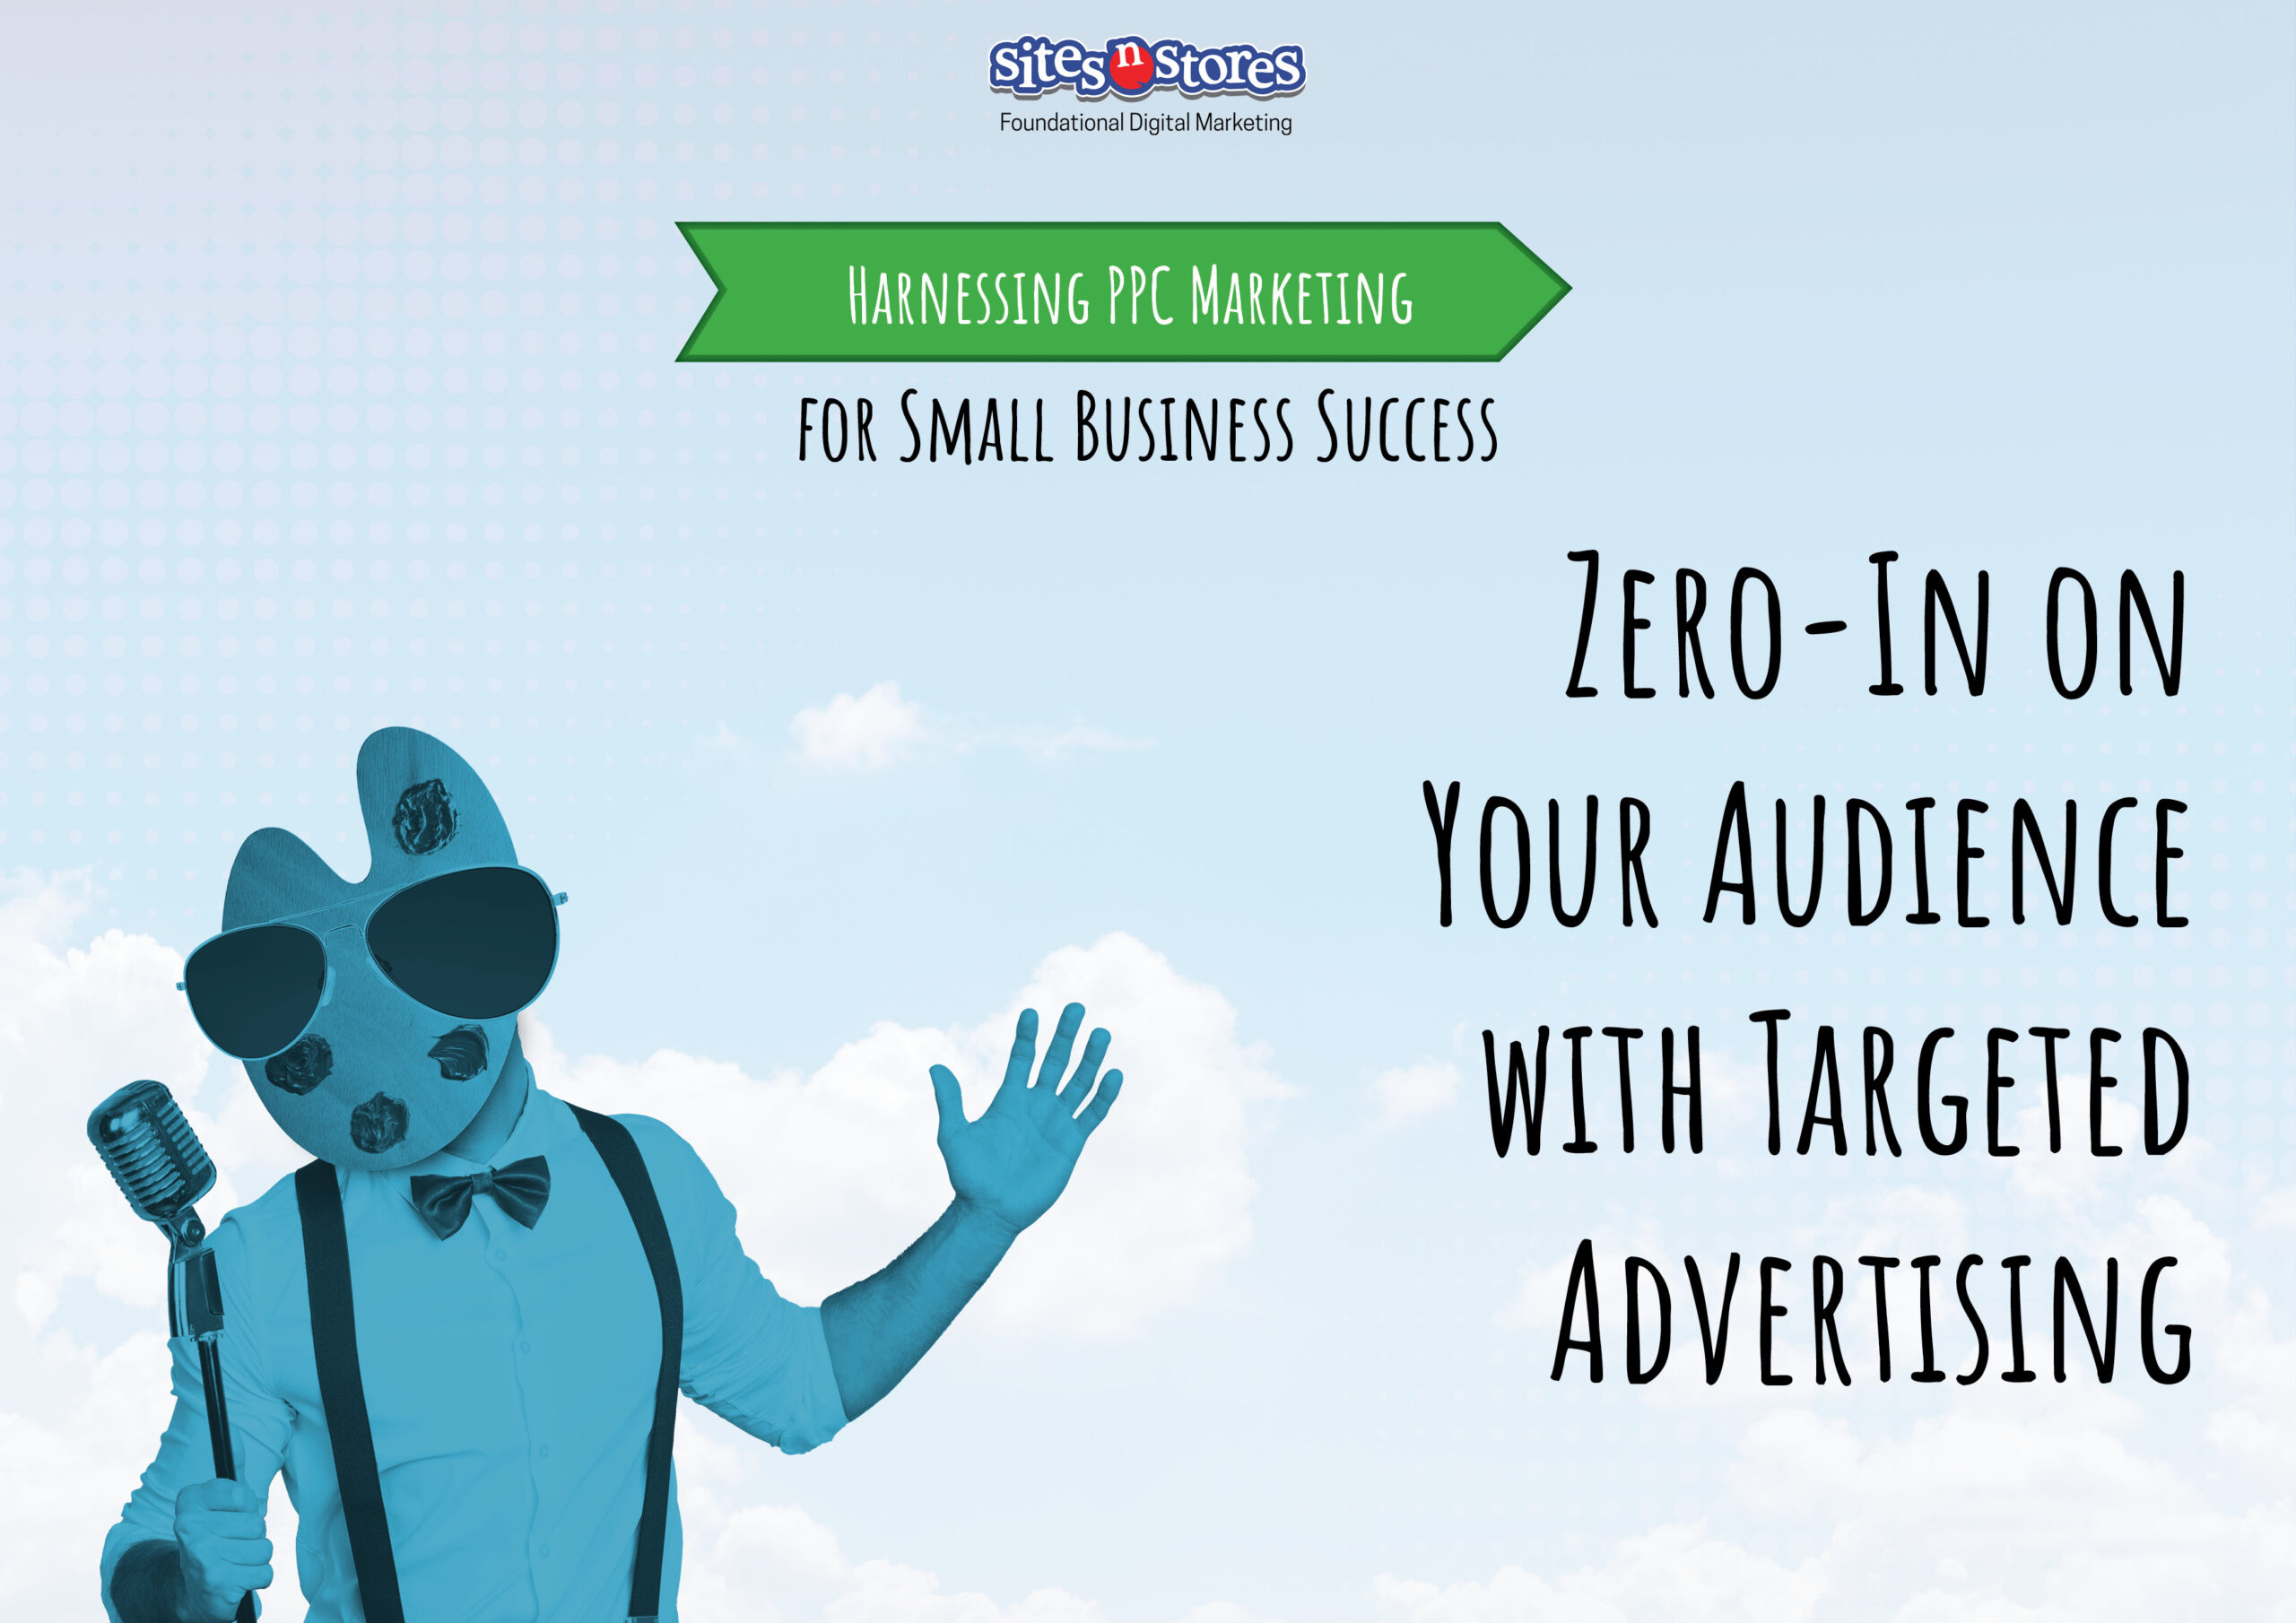 Zero-In on Your Audience with Targeted Advertising